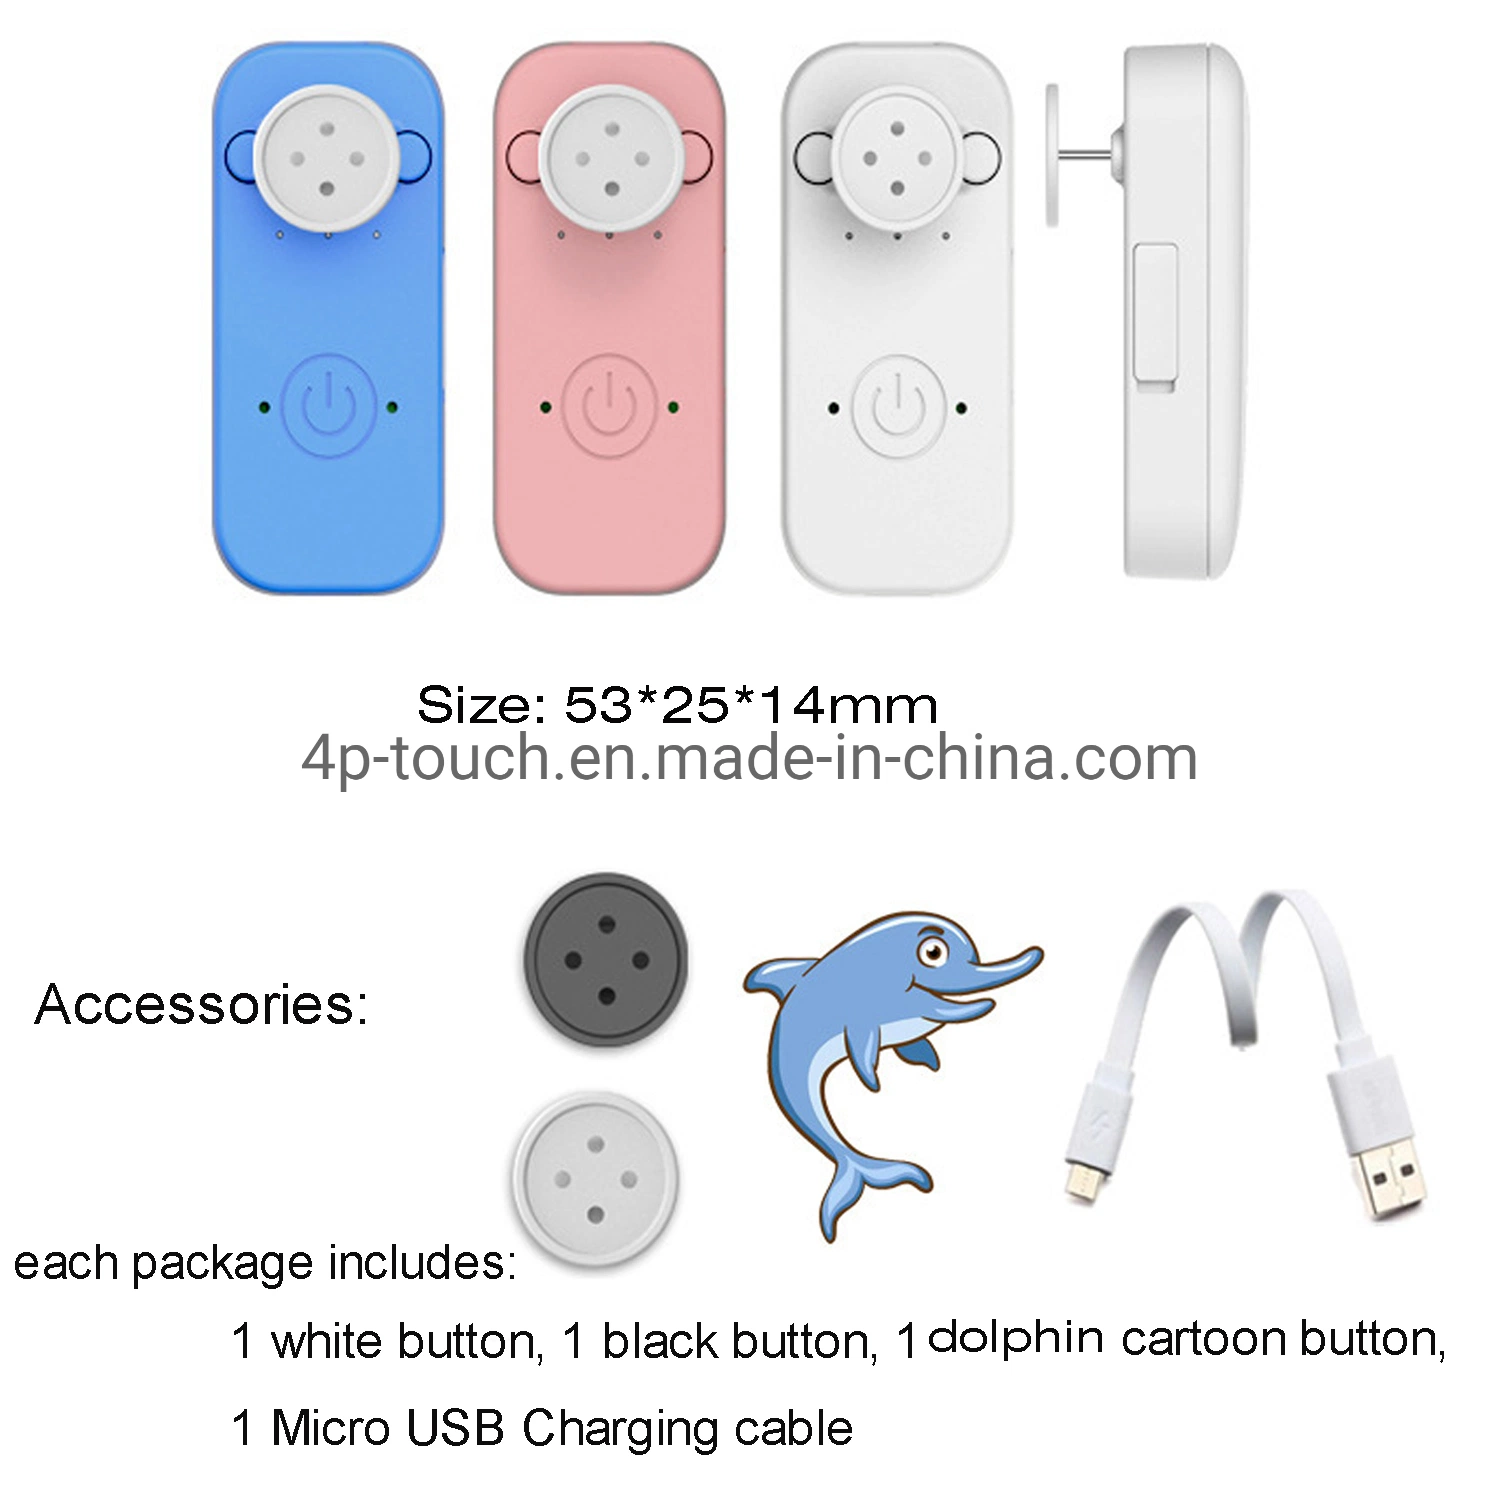 New Design 4G IP67 Waterproof Real Time Google Map Tracking Hidden Mini Tracker GPS for Kids Students with No Disturbing in Class A43